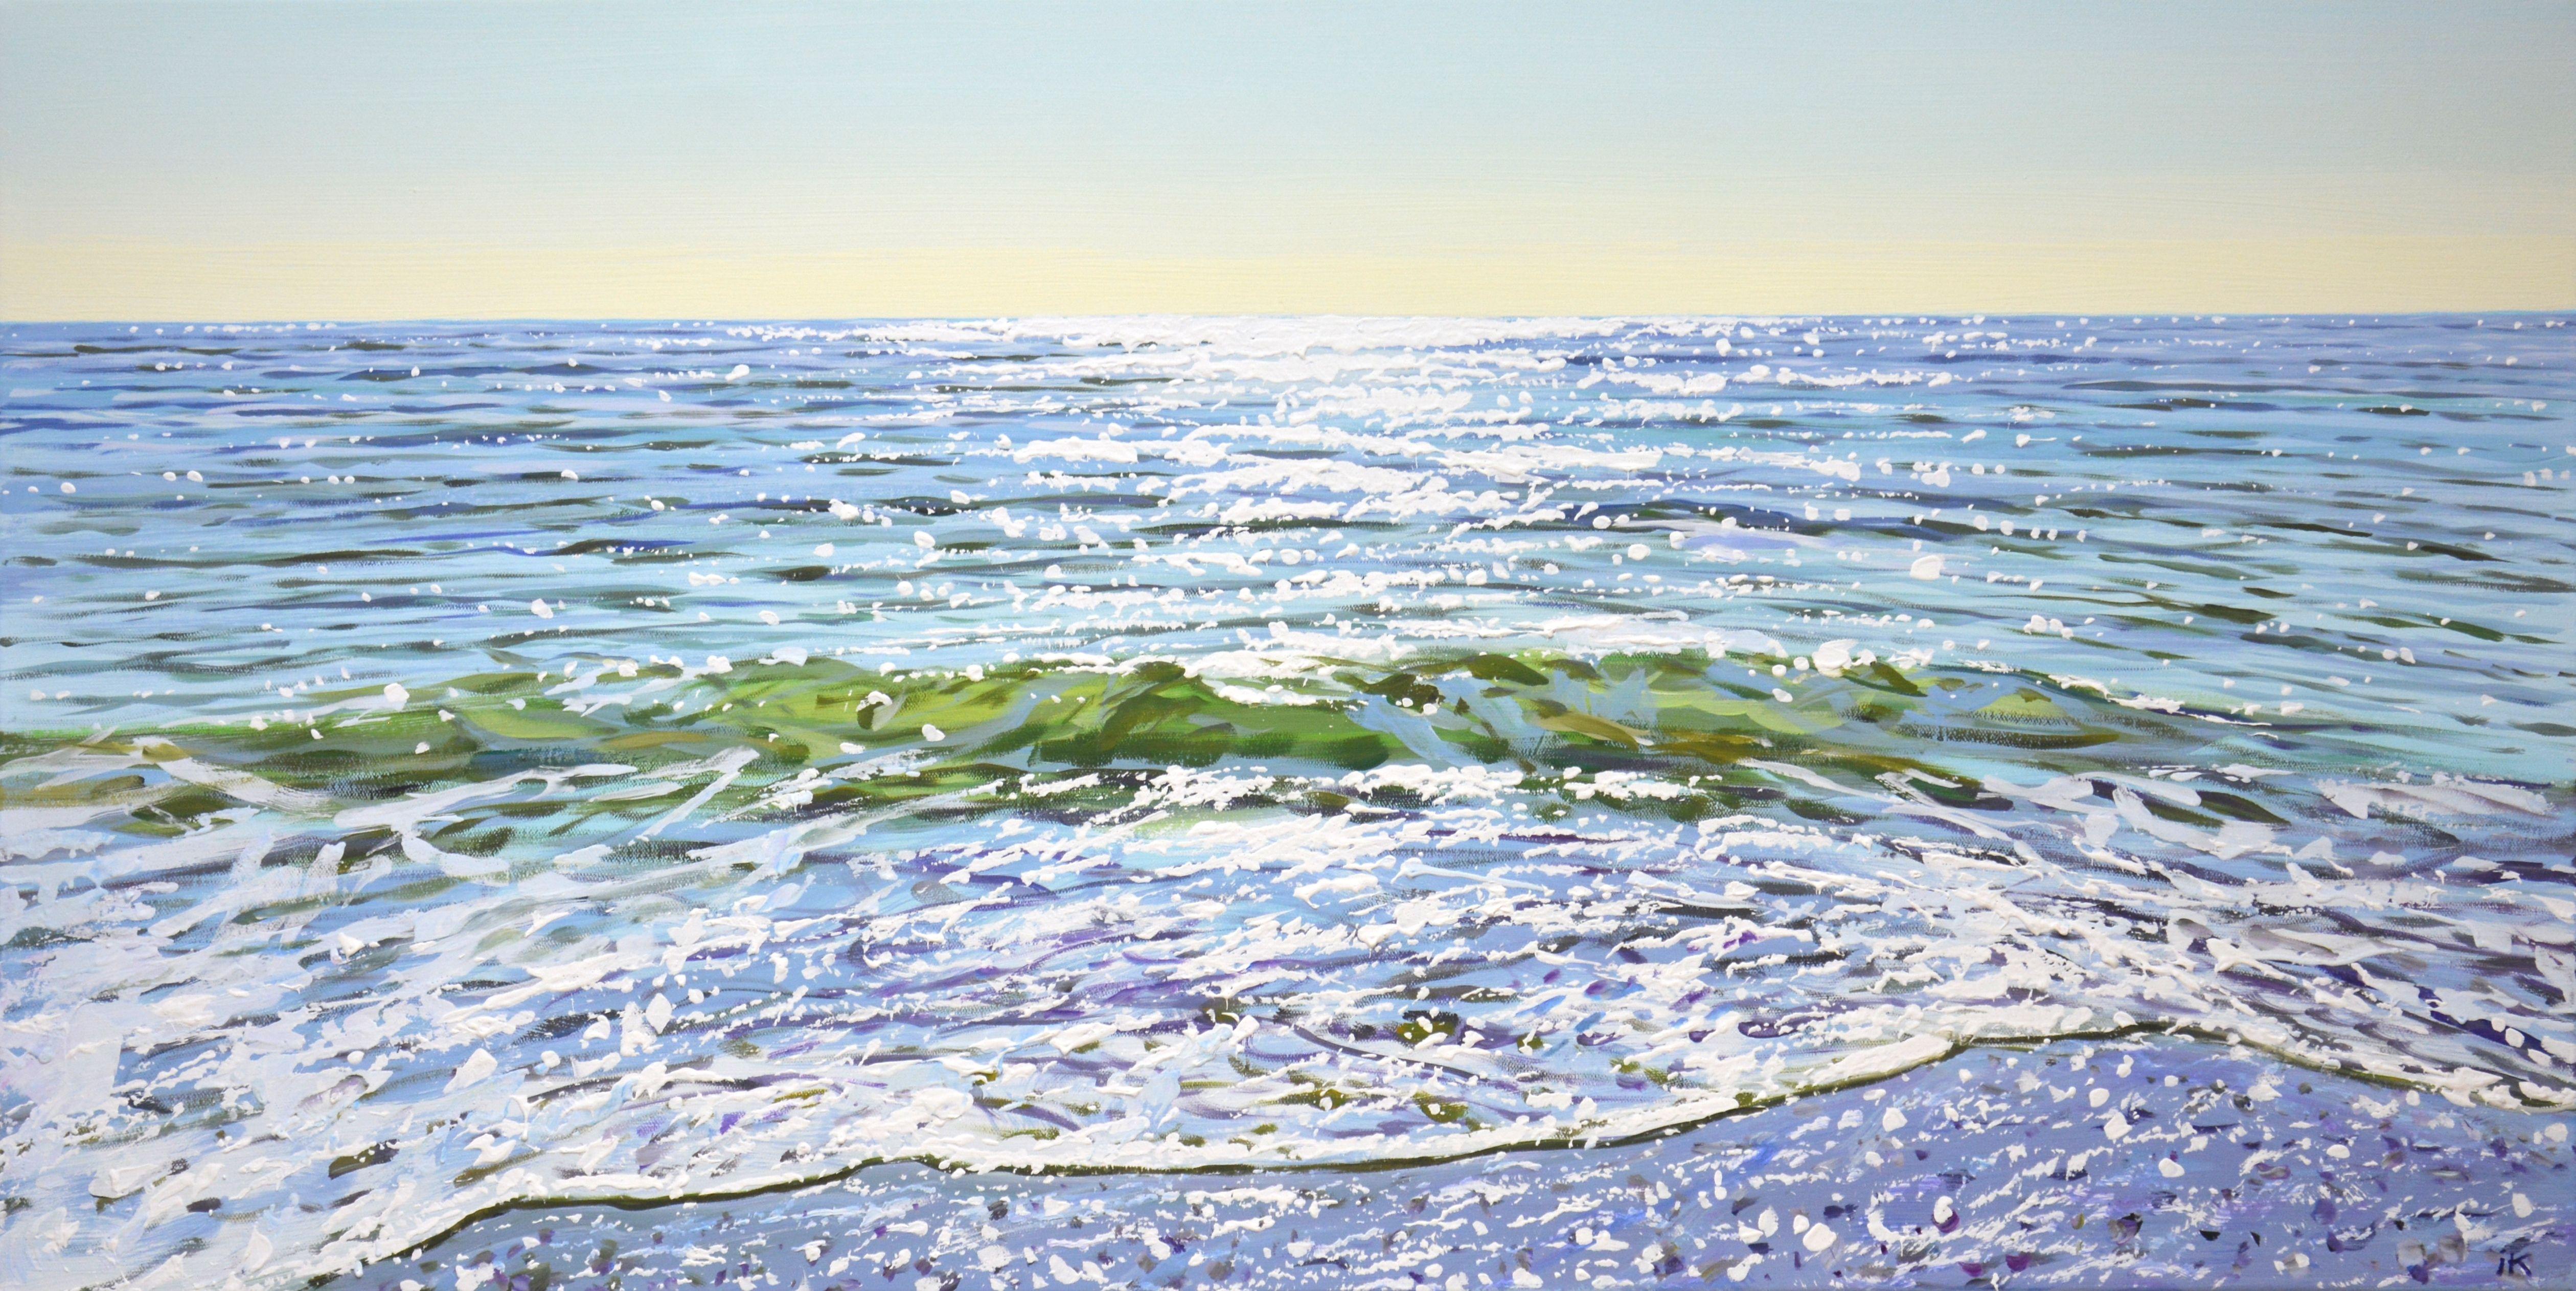 Sea 22.     Light blue water, sea, ocean, small waves, glare on the water, clear sky create an atmosphere of relaxation and romance. Made in the style of realism, light blue, white palette emphasizes the energy of water. Part of a permanent series